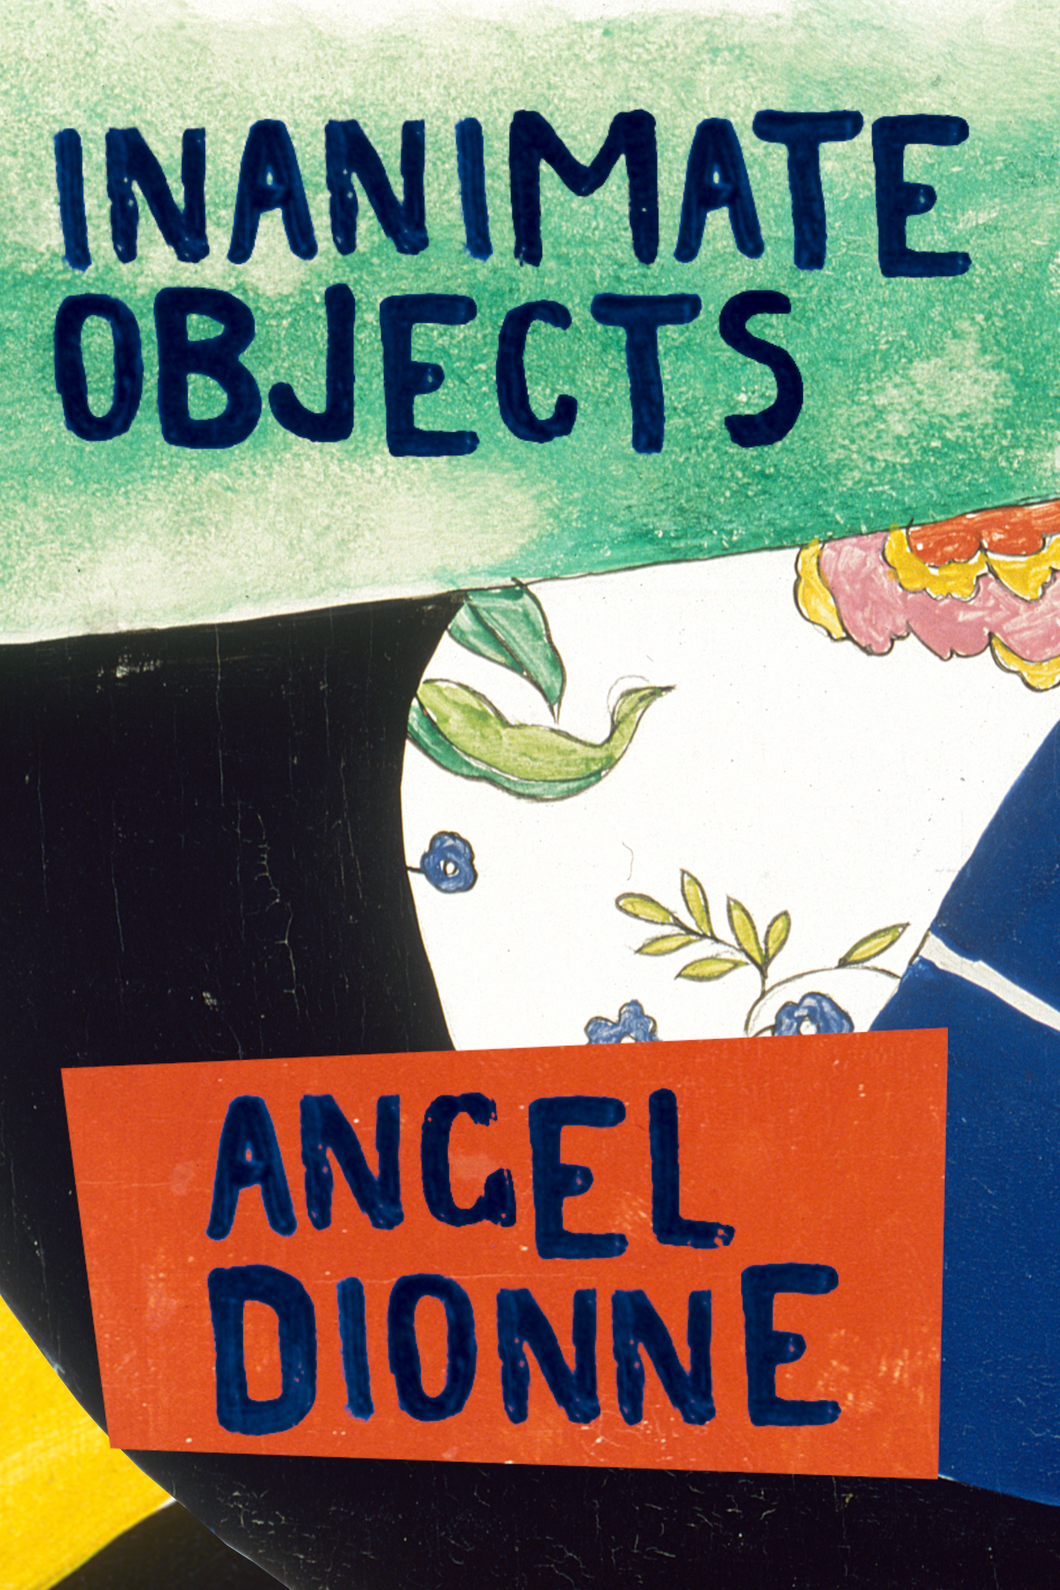 Inanimate Objects, by Angel Dionne-Print Books-Bottlecap Press